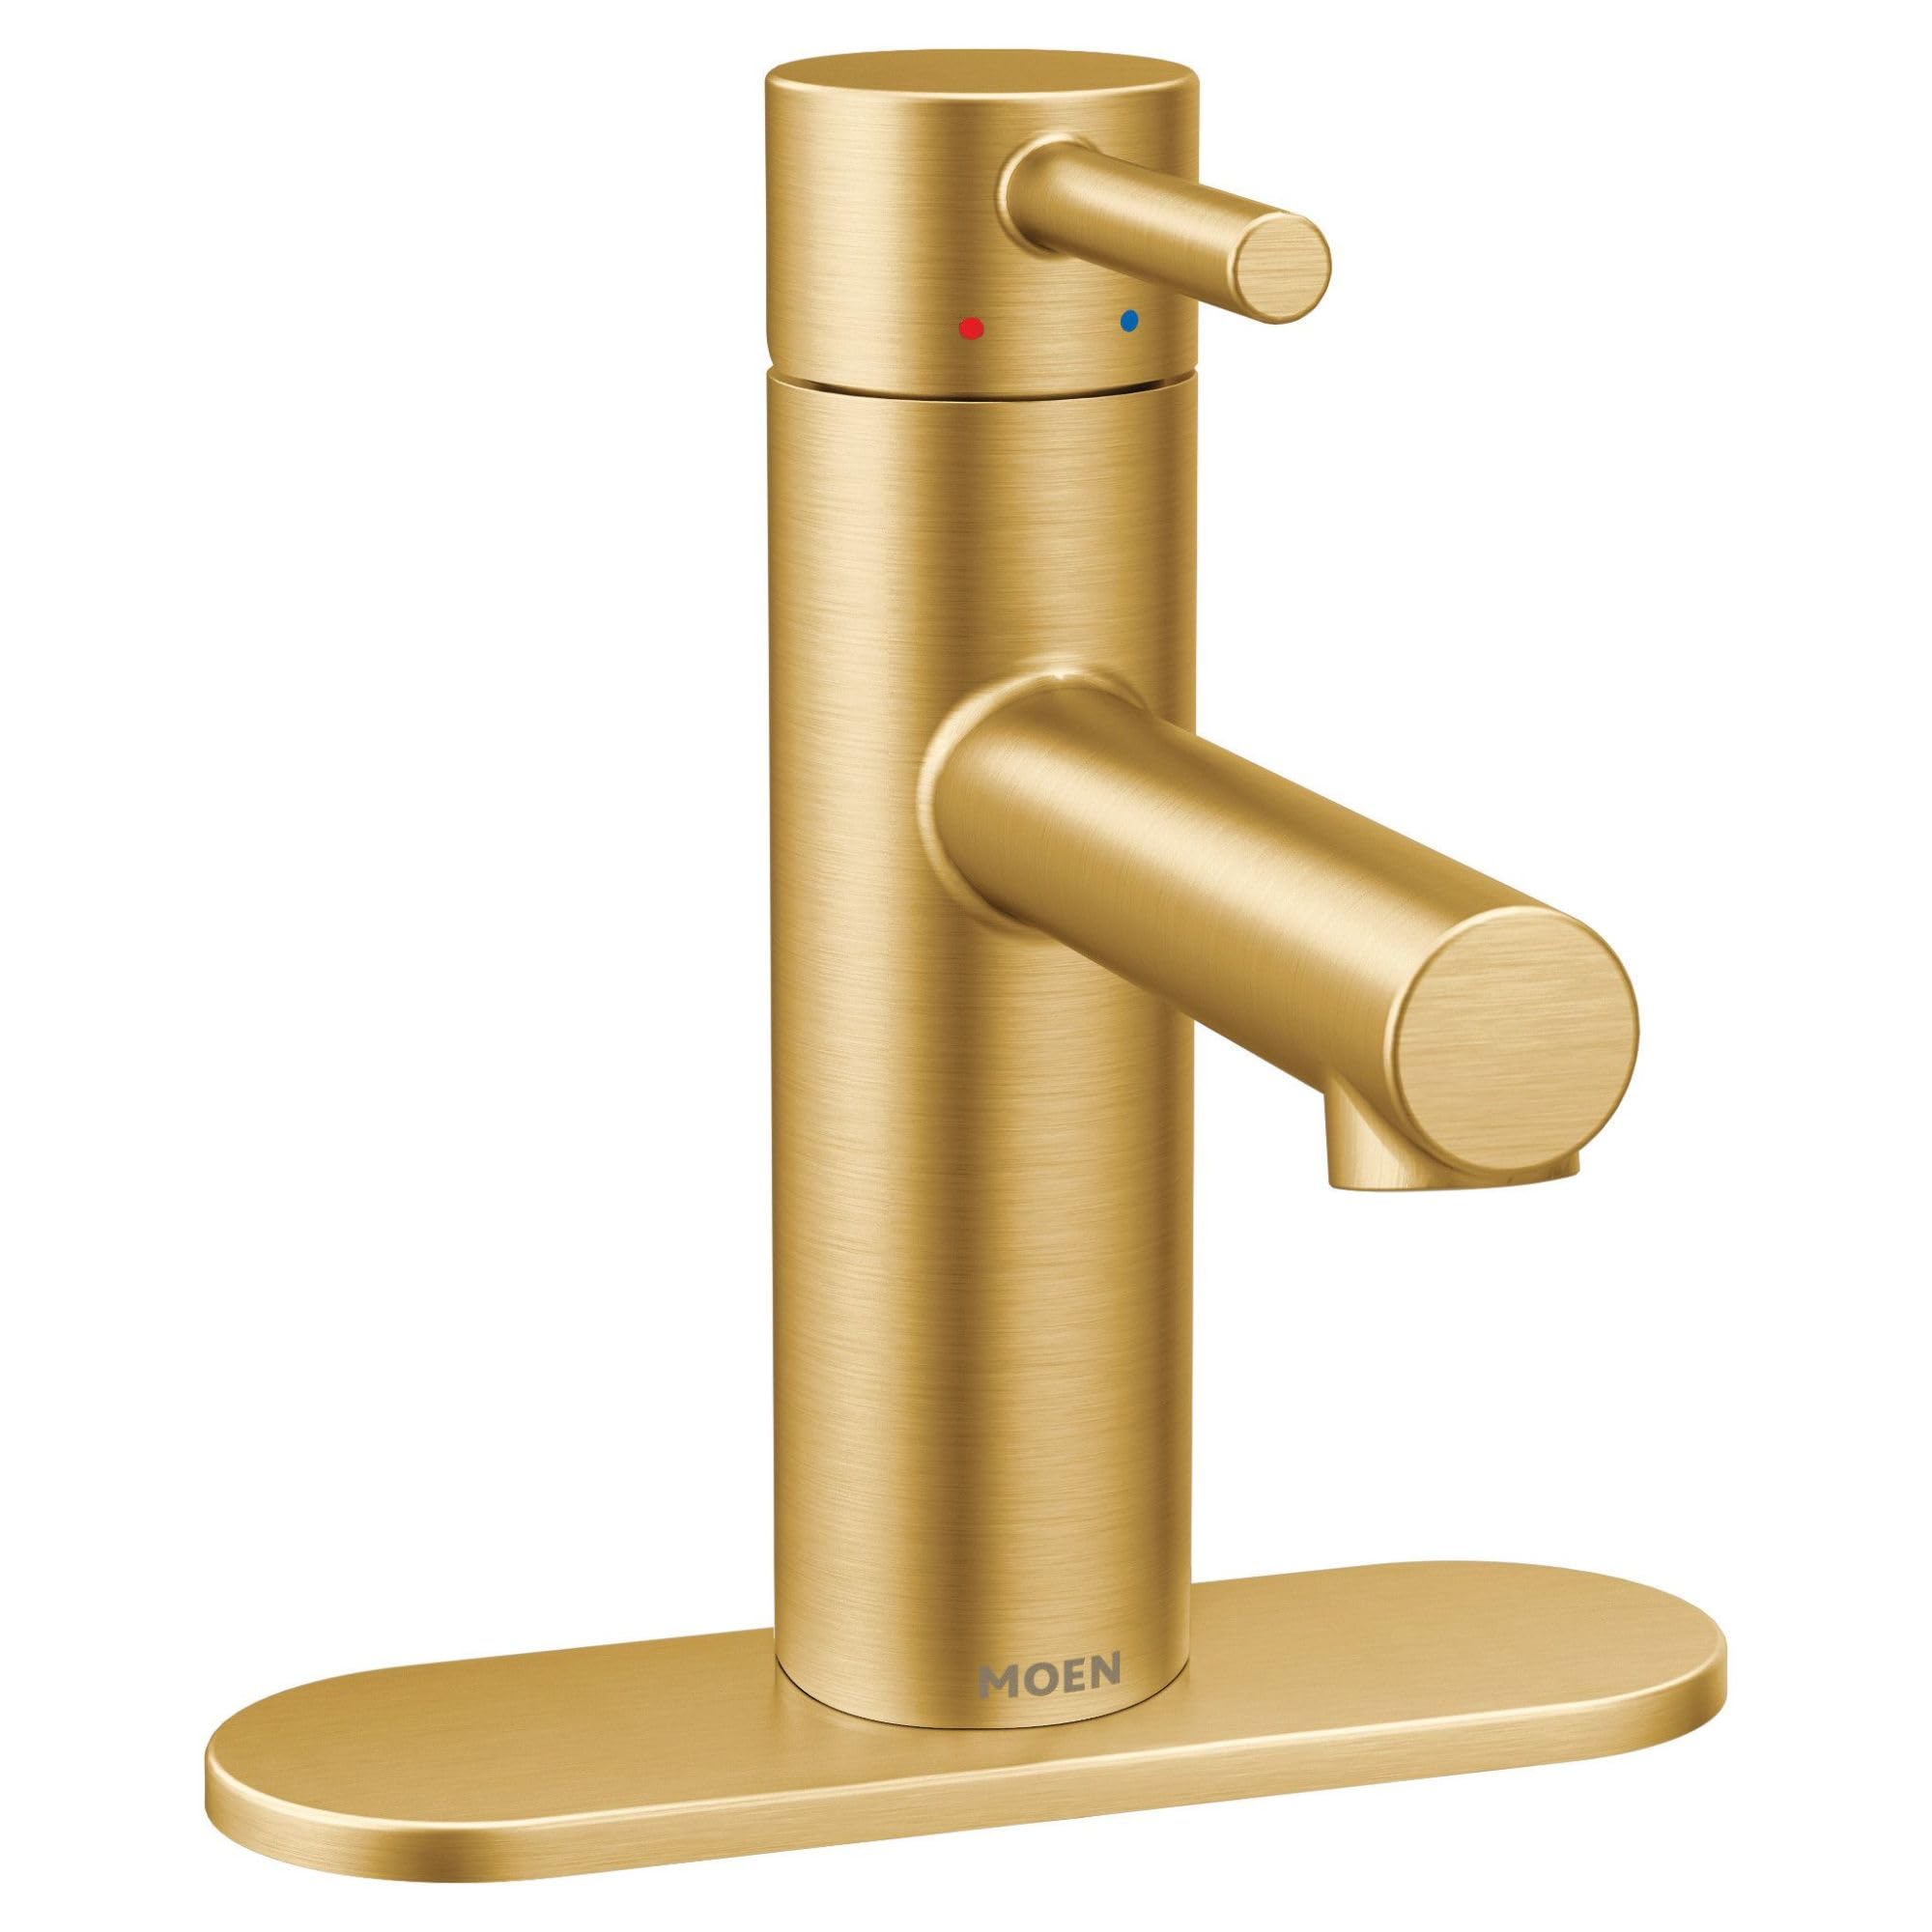 Moen Align Brushed Gold One-Handle Modern Bathroom Faucet with Drain Assembly and Optional Deckplate, Single Hole Bathroom Sink Faucet, 6190BG